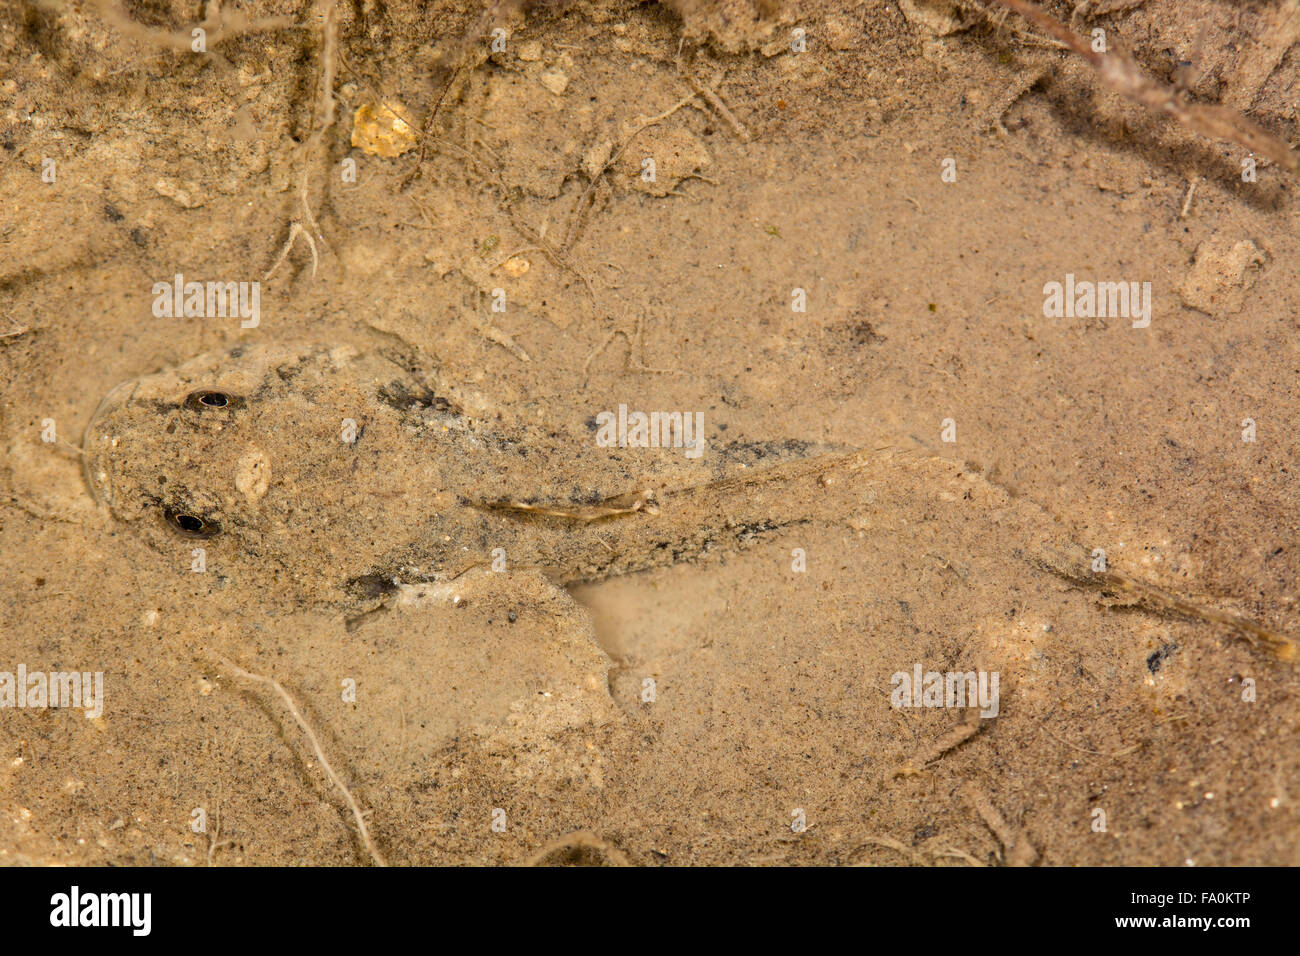 European bullhead fish (Cottus gobio). A freshwater fish photographed from above camouflaged and half-buried in silt at bottom Stock Photo